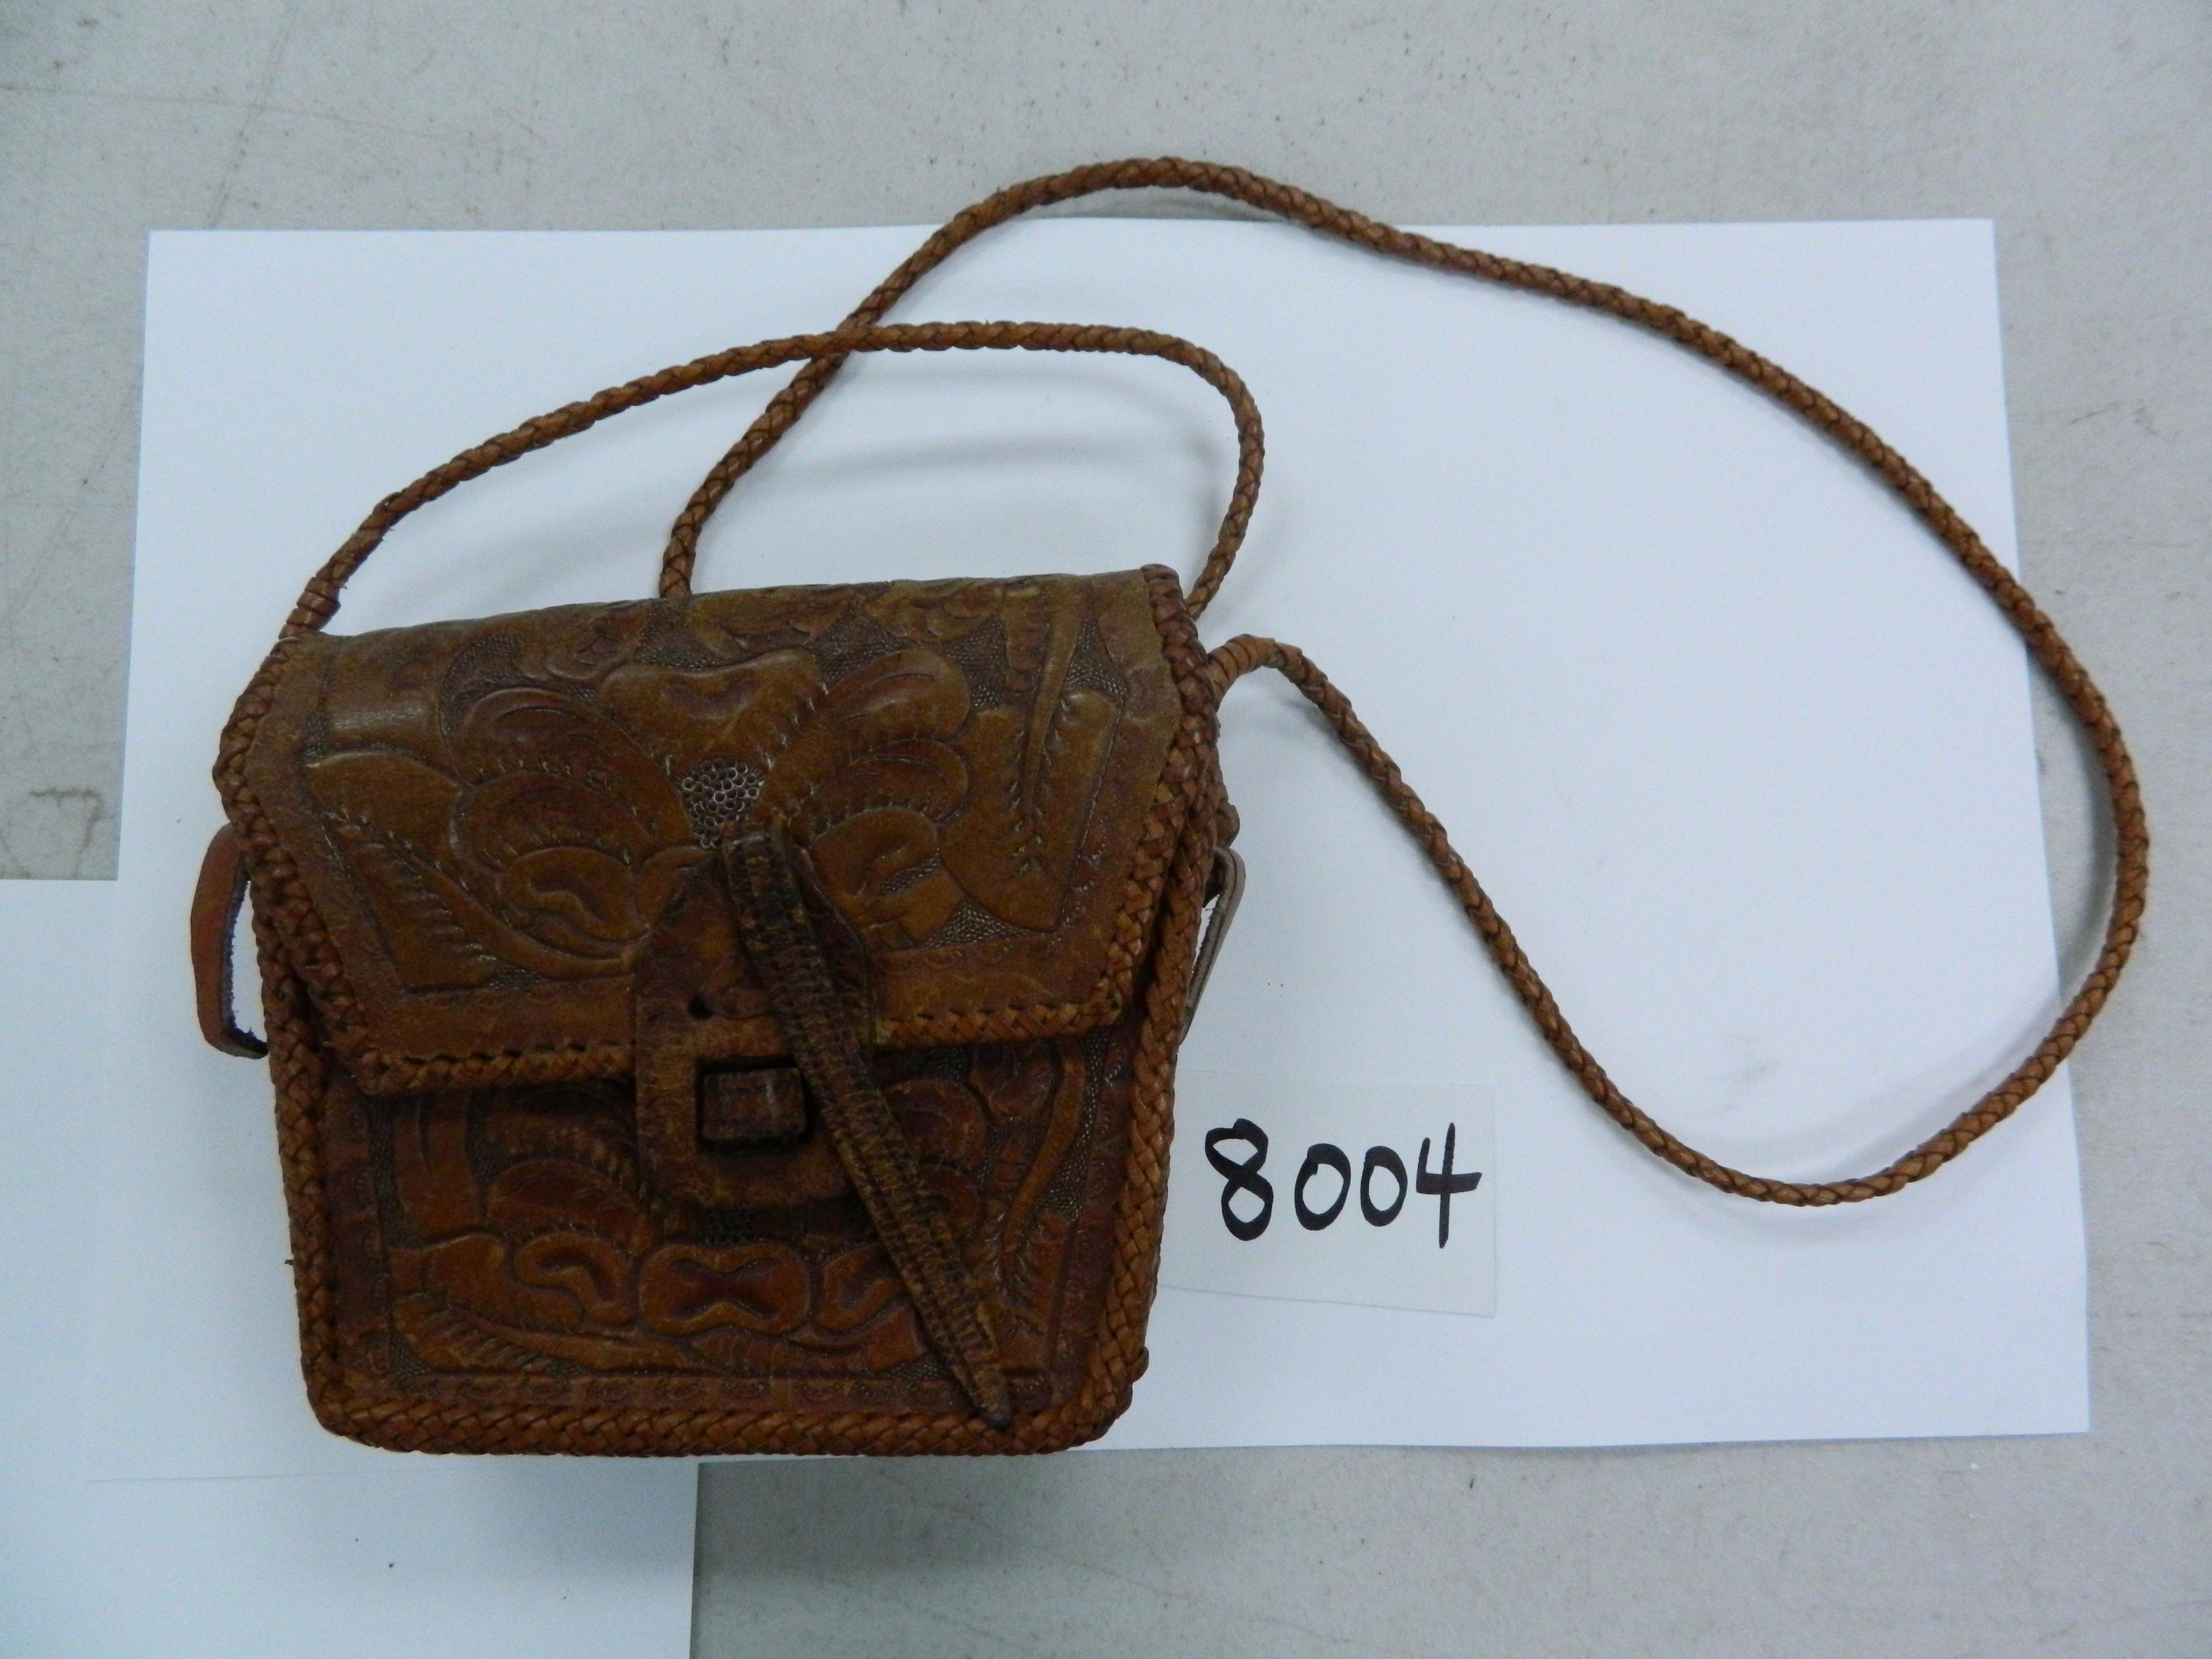 6.5" x 7.5" Vintage Highly Tooled Leather Purse,